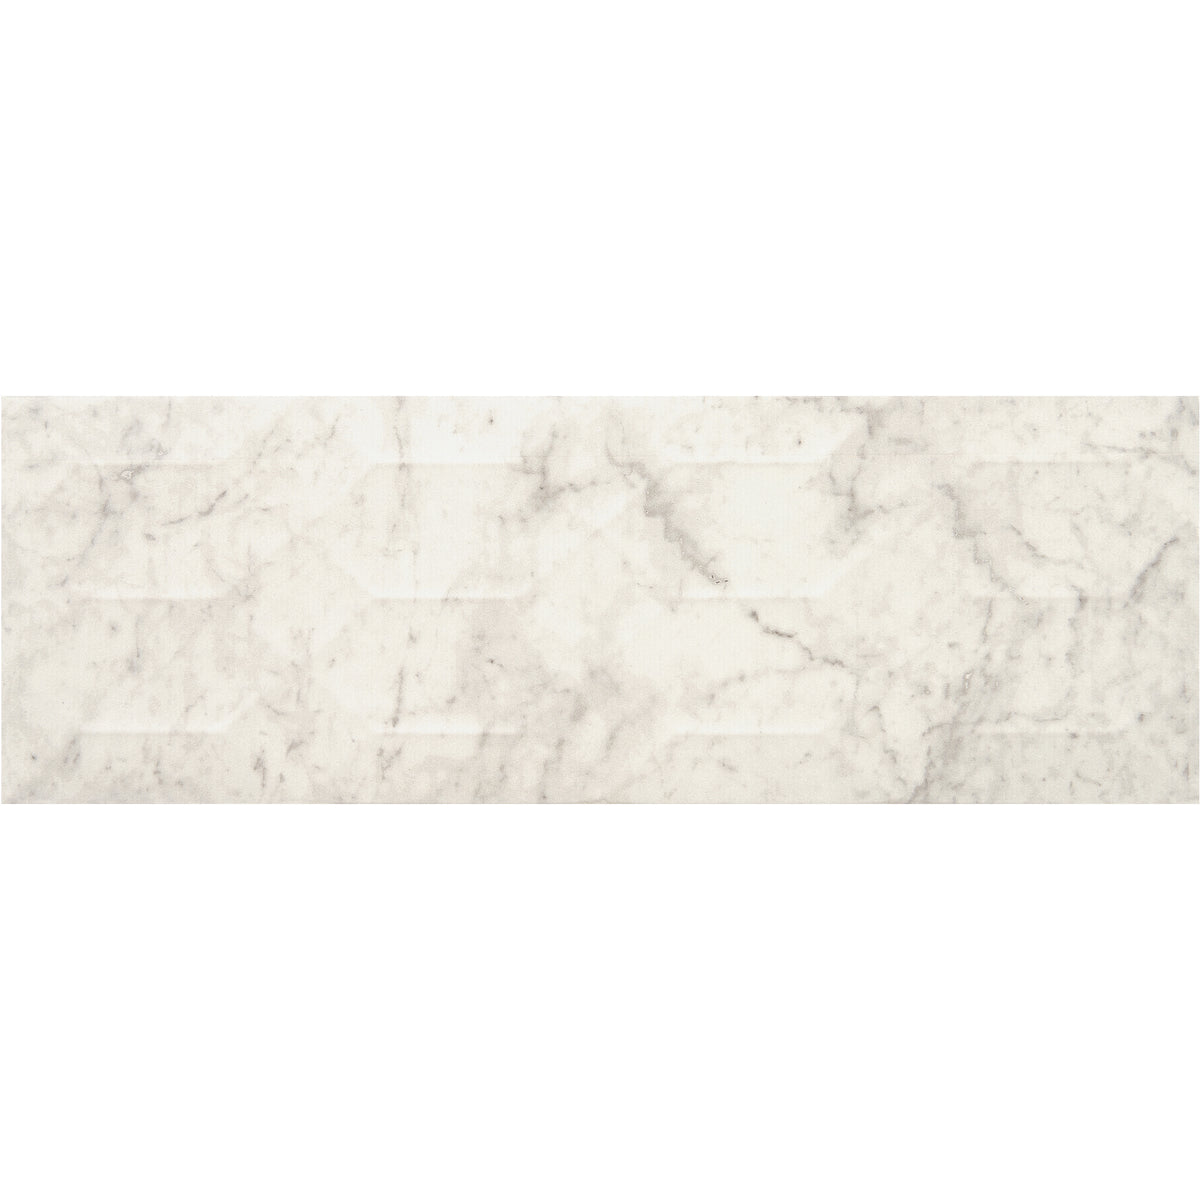 American Olean - Mythique Marble 8 in. x 24 in. Glazed Ceramic Wall Tile - Altissimo